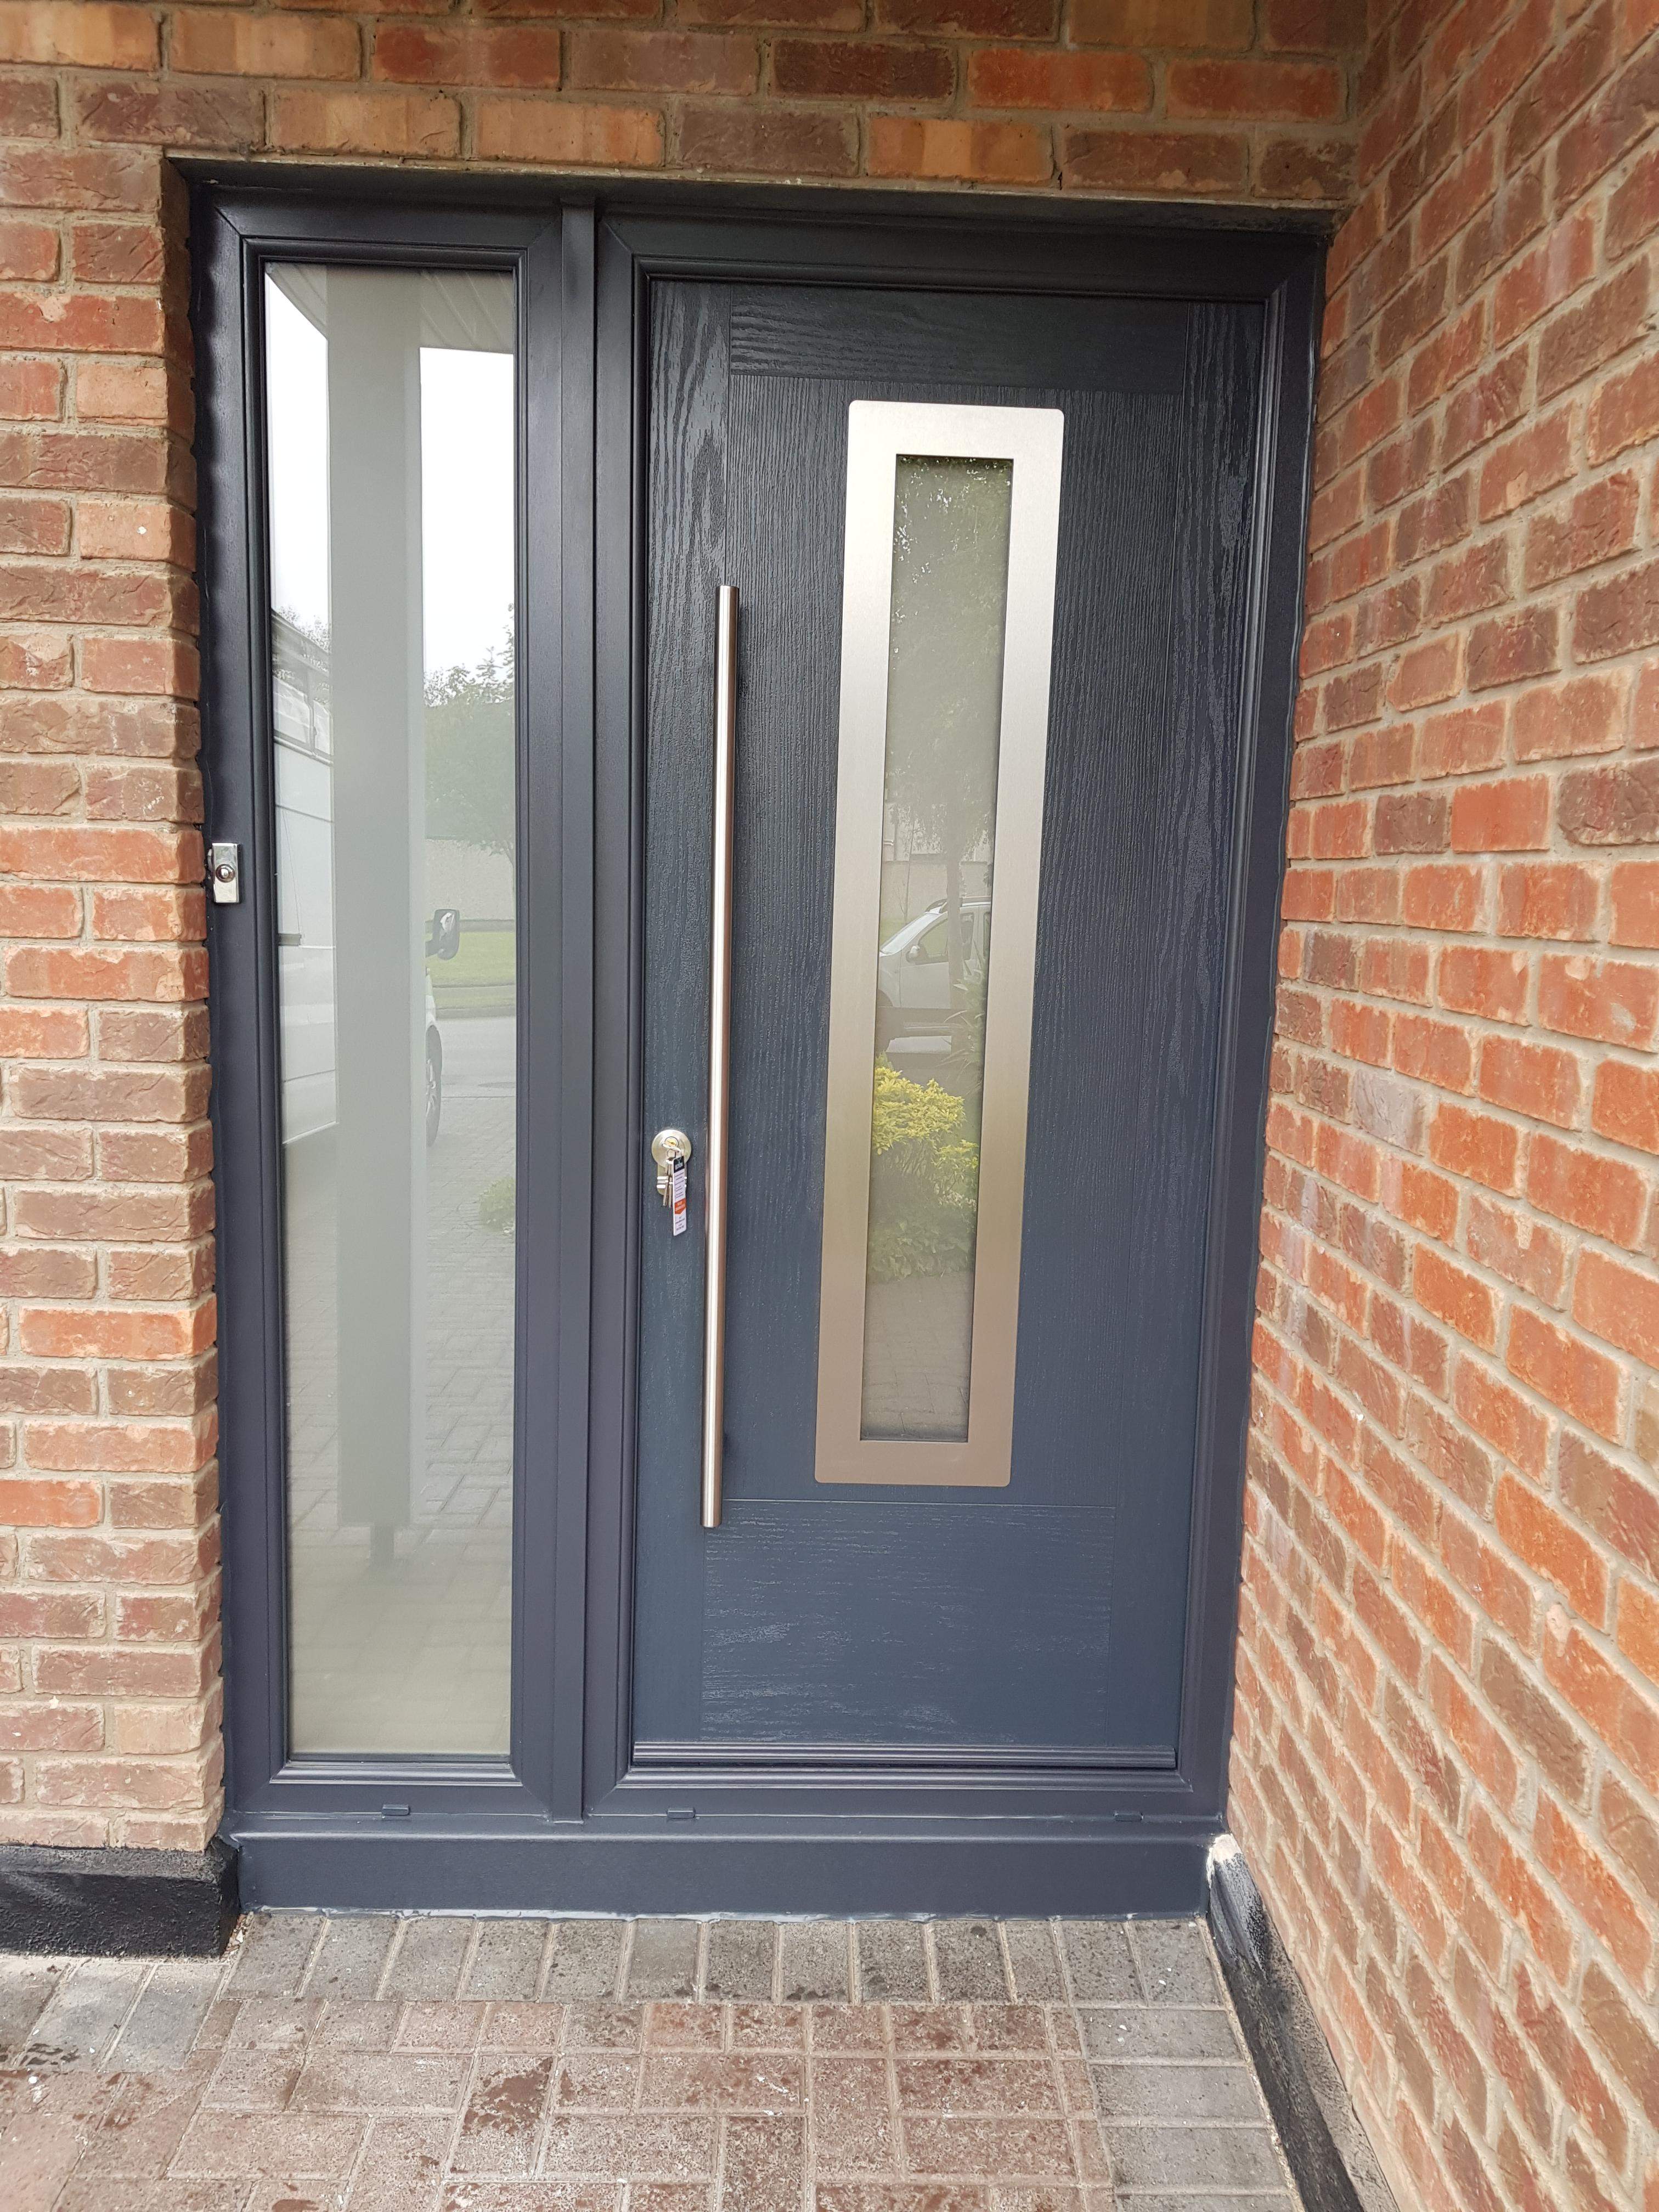 ANTHRACITE GREY MODO DOOR WITH SLAM LOCK WITH BAR HANDLE AND WAIST HIGH LOCK